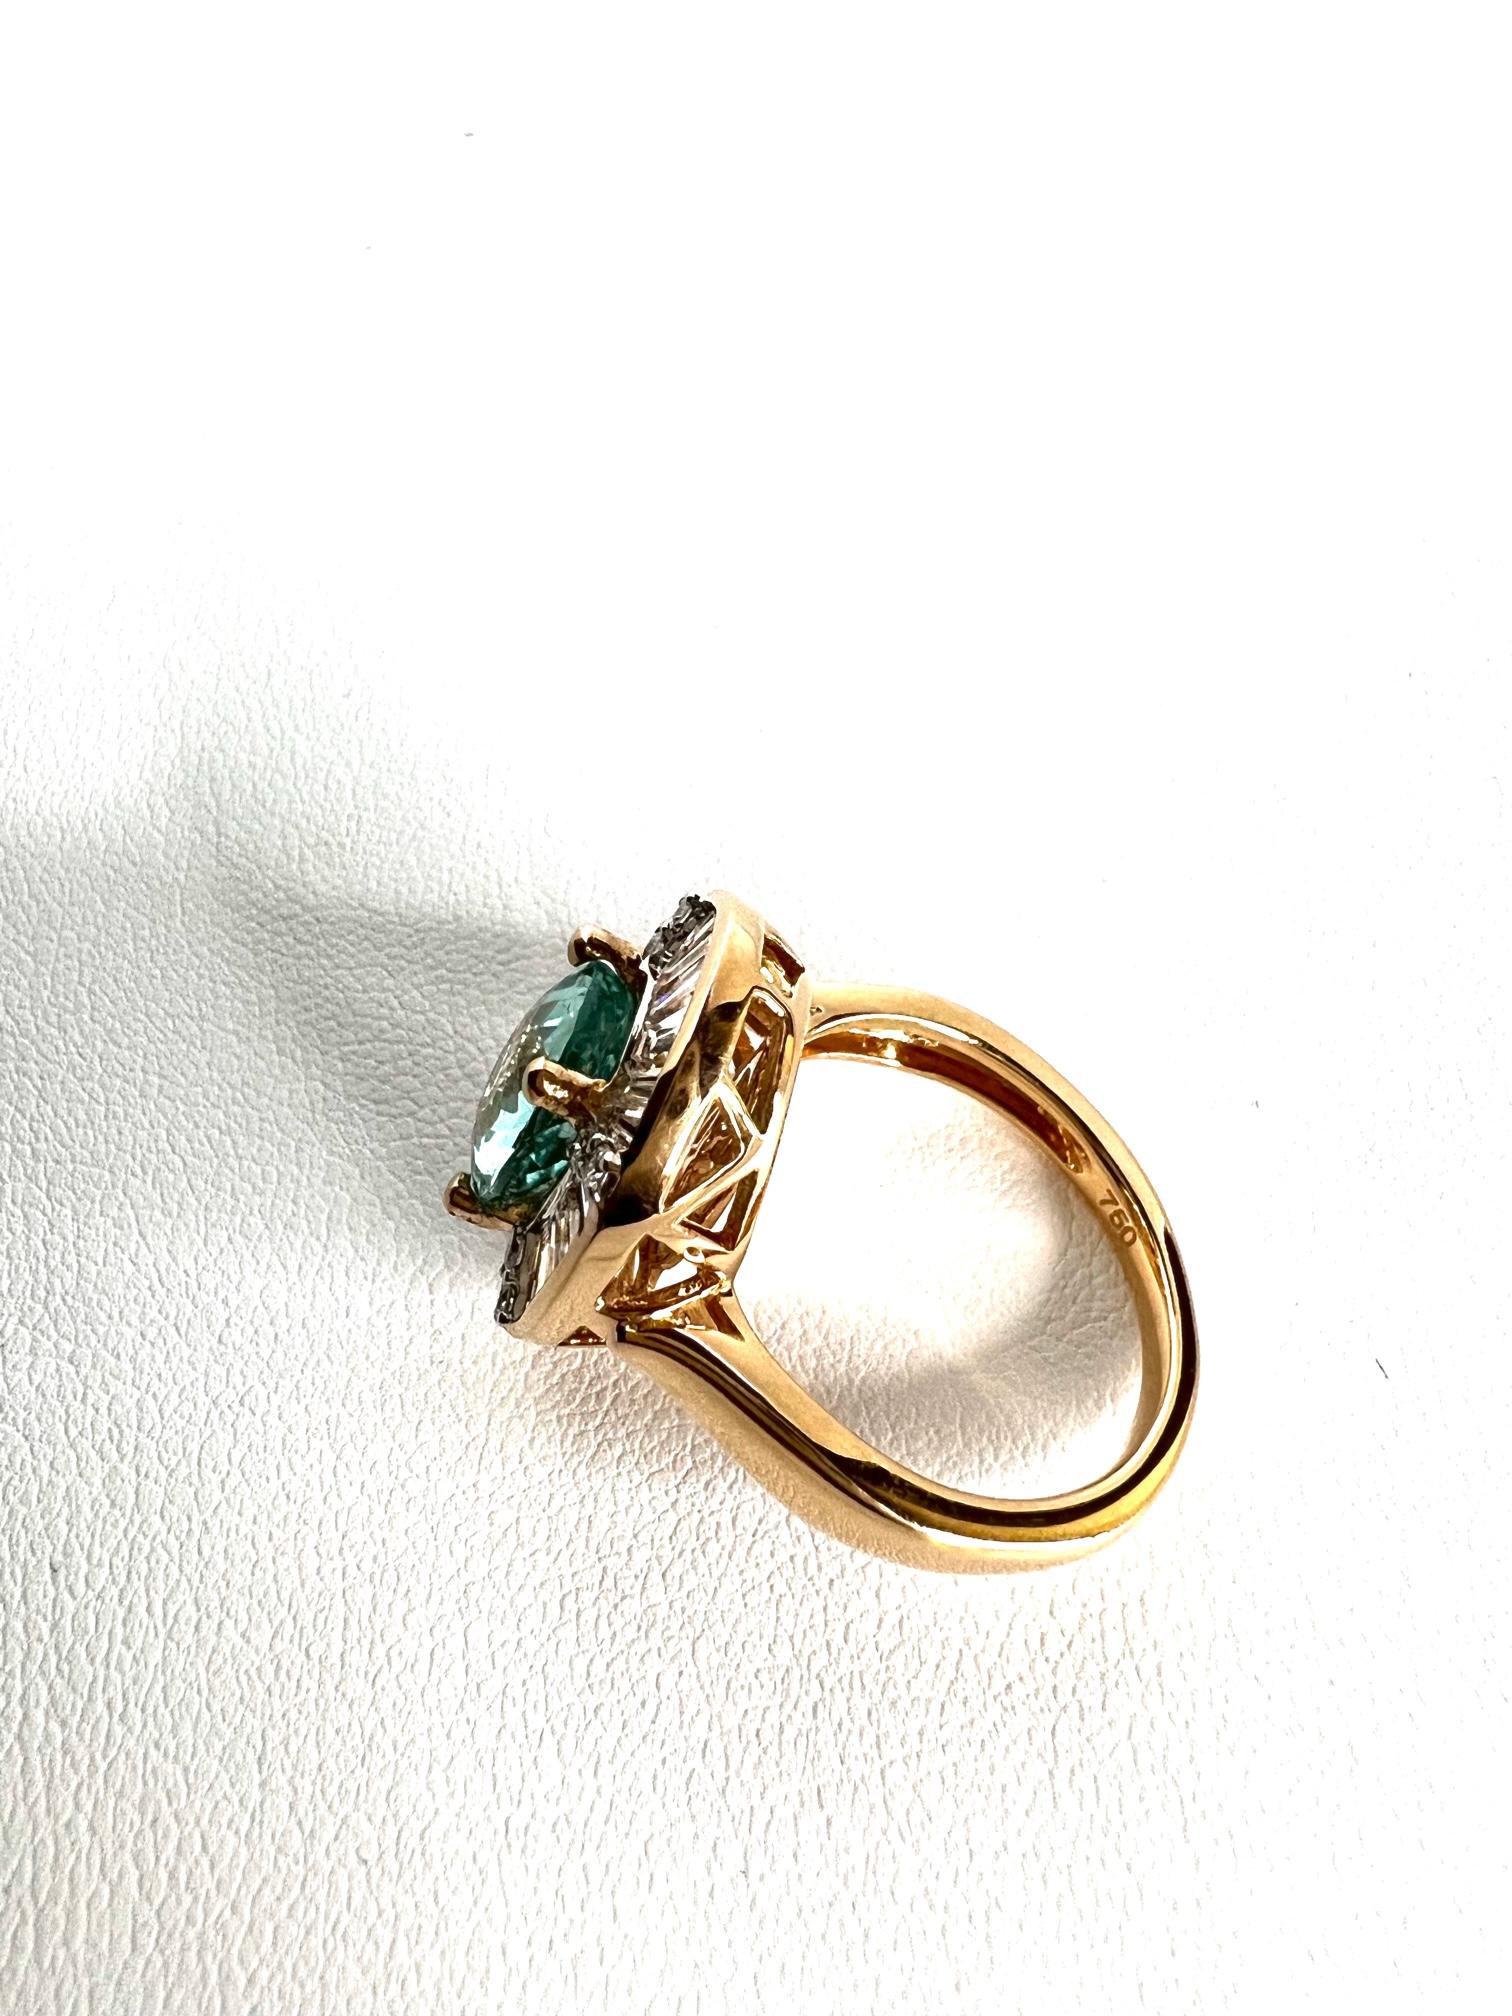 Ring in 18k Red Gold with Paraiba Tourmaline and Diamonds 2